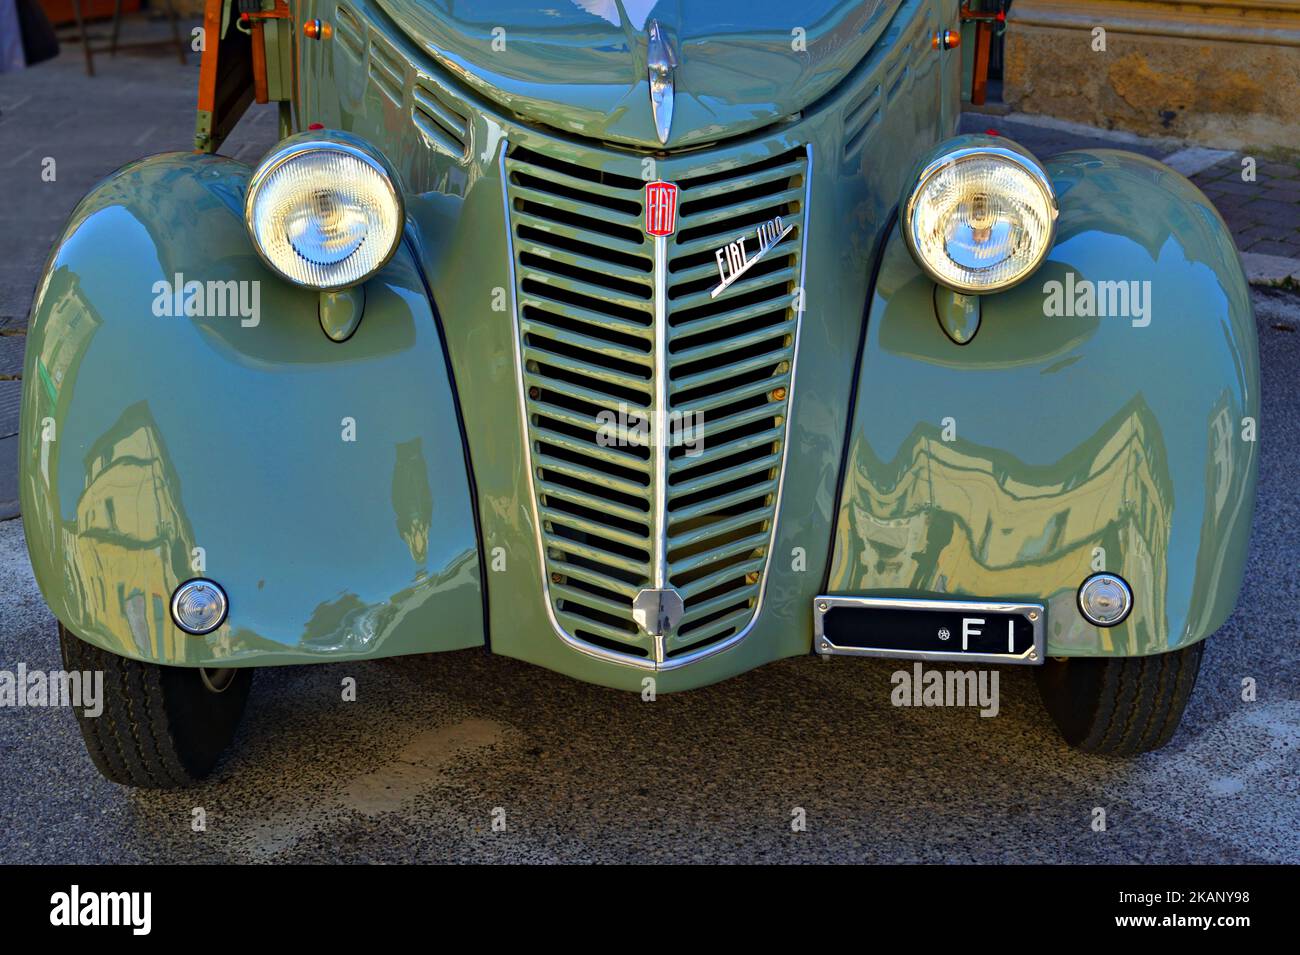 Vintage car from 1952 made by Fiat 1100 ELR of the Italian car manufacturer Fiat Stock Photo